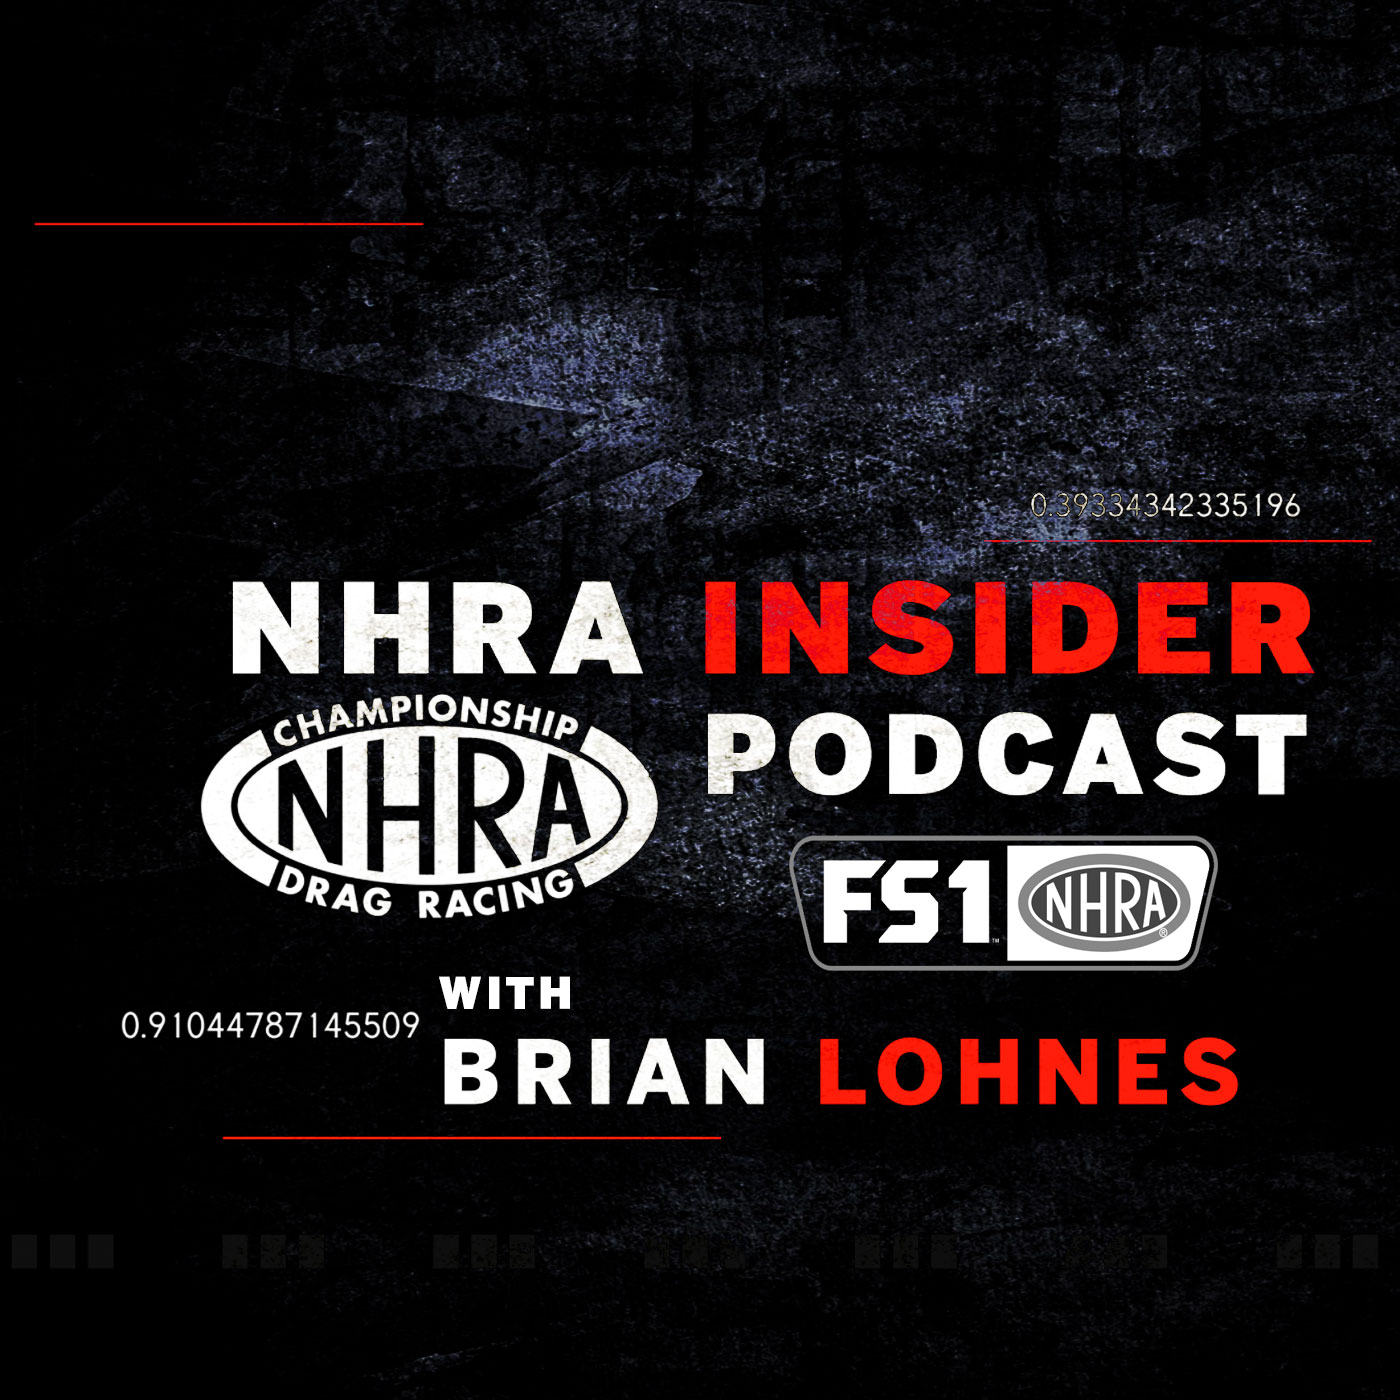 Listen Up: The NHRA Insider Podcast Is Spilling The Big Inside Stories From Houston And Previewing Charlotte!